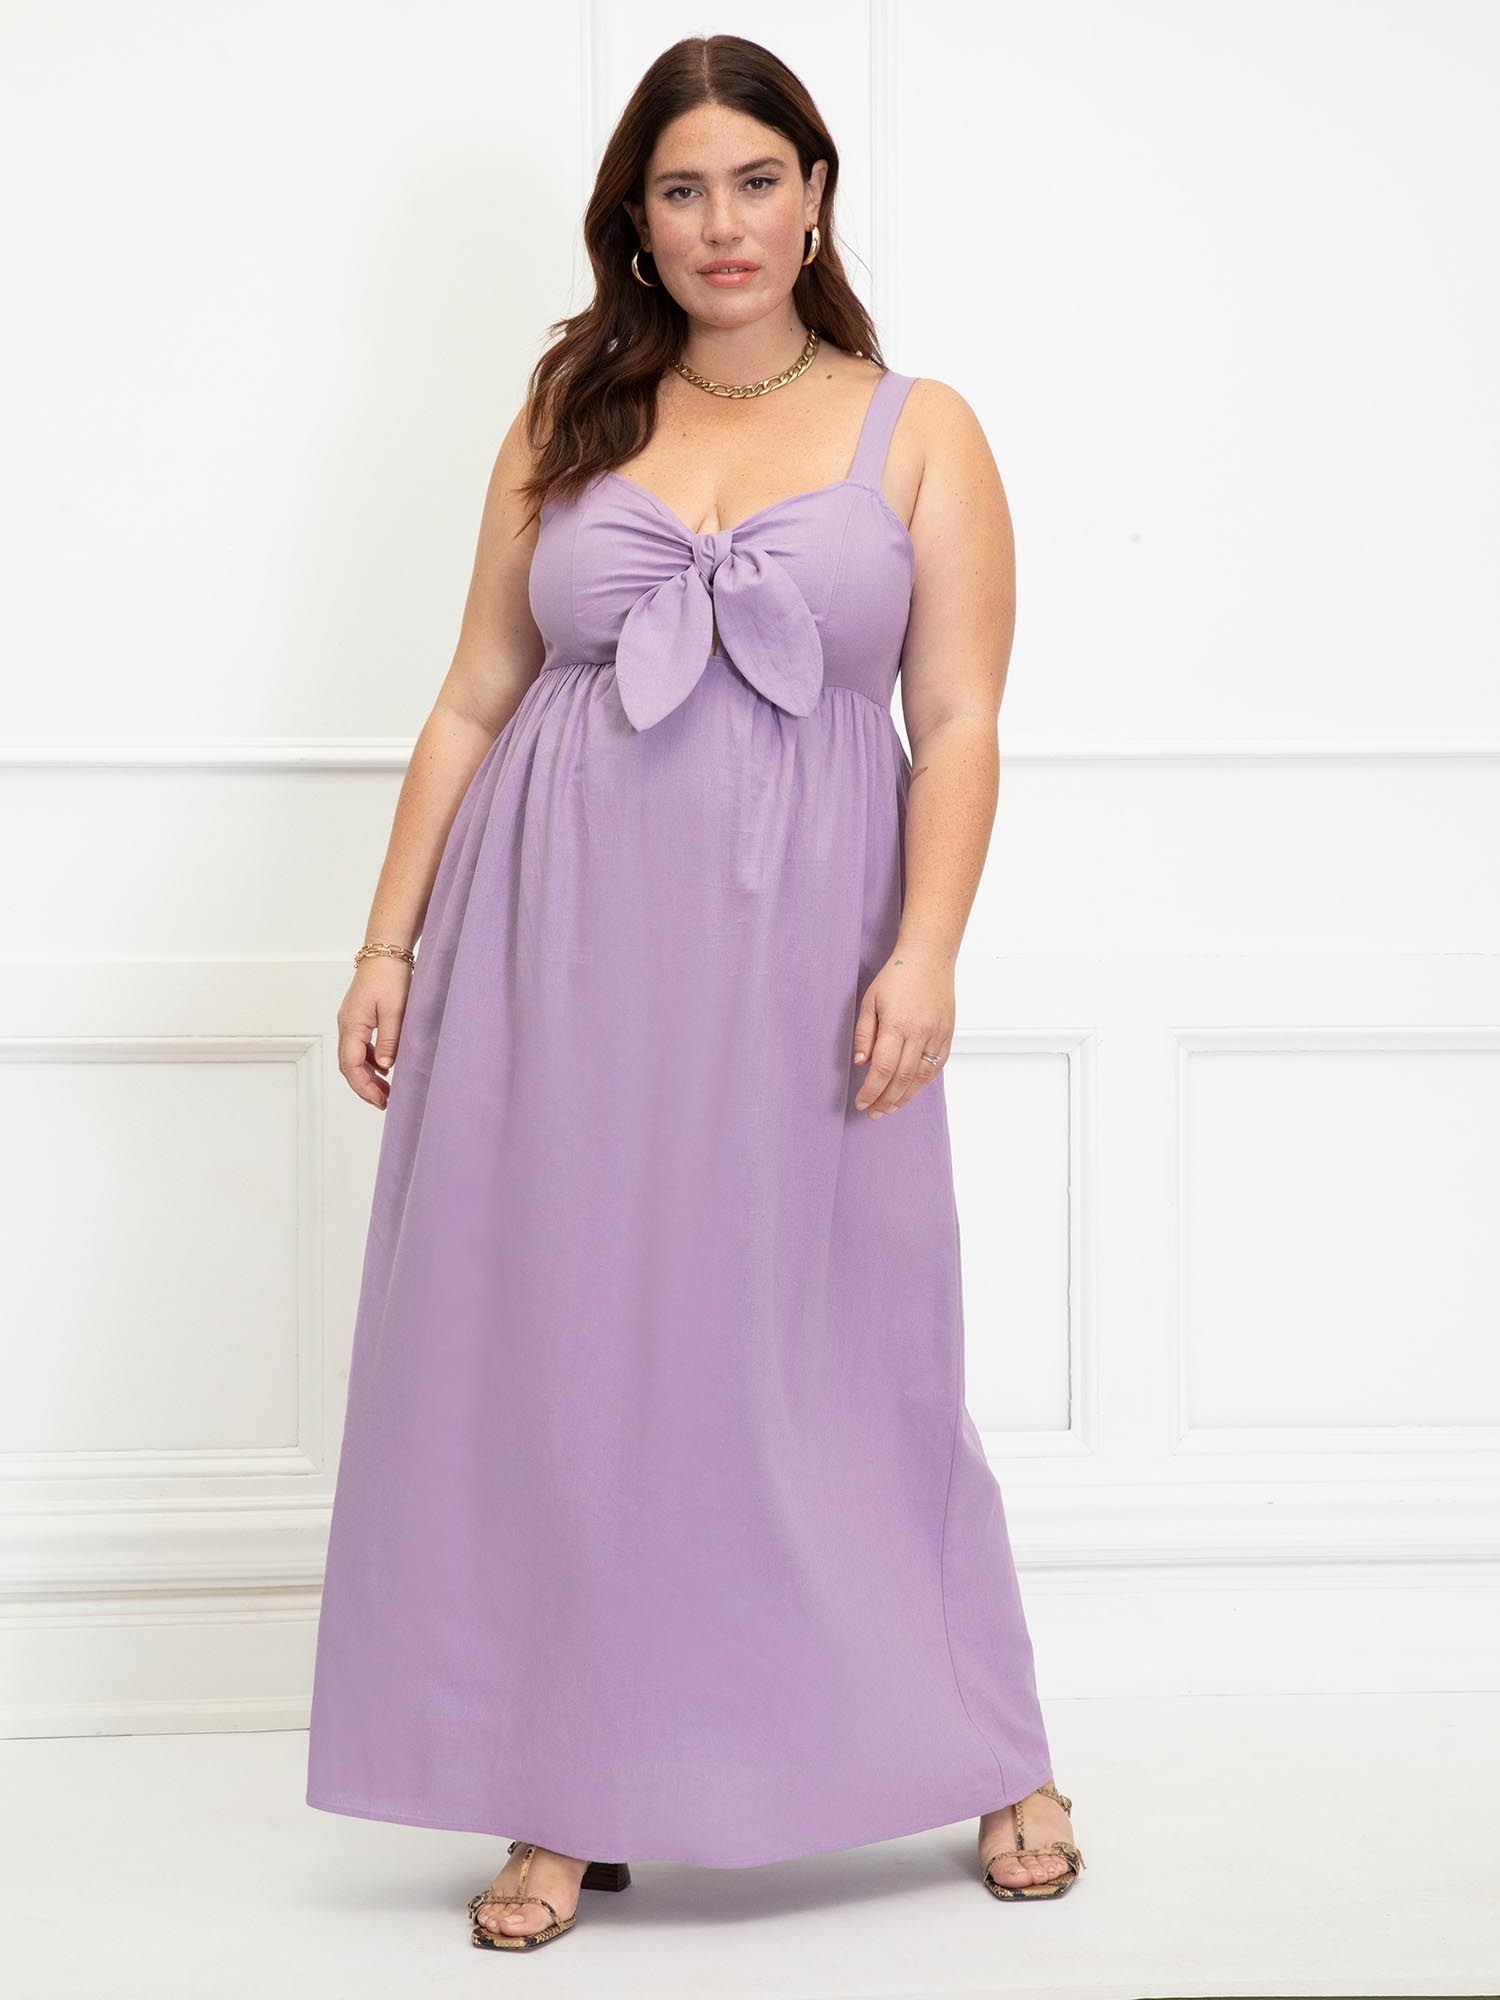 woman wearing lavender dress and brown sandals